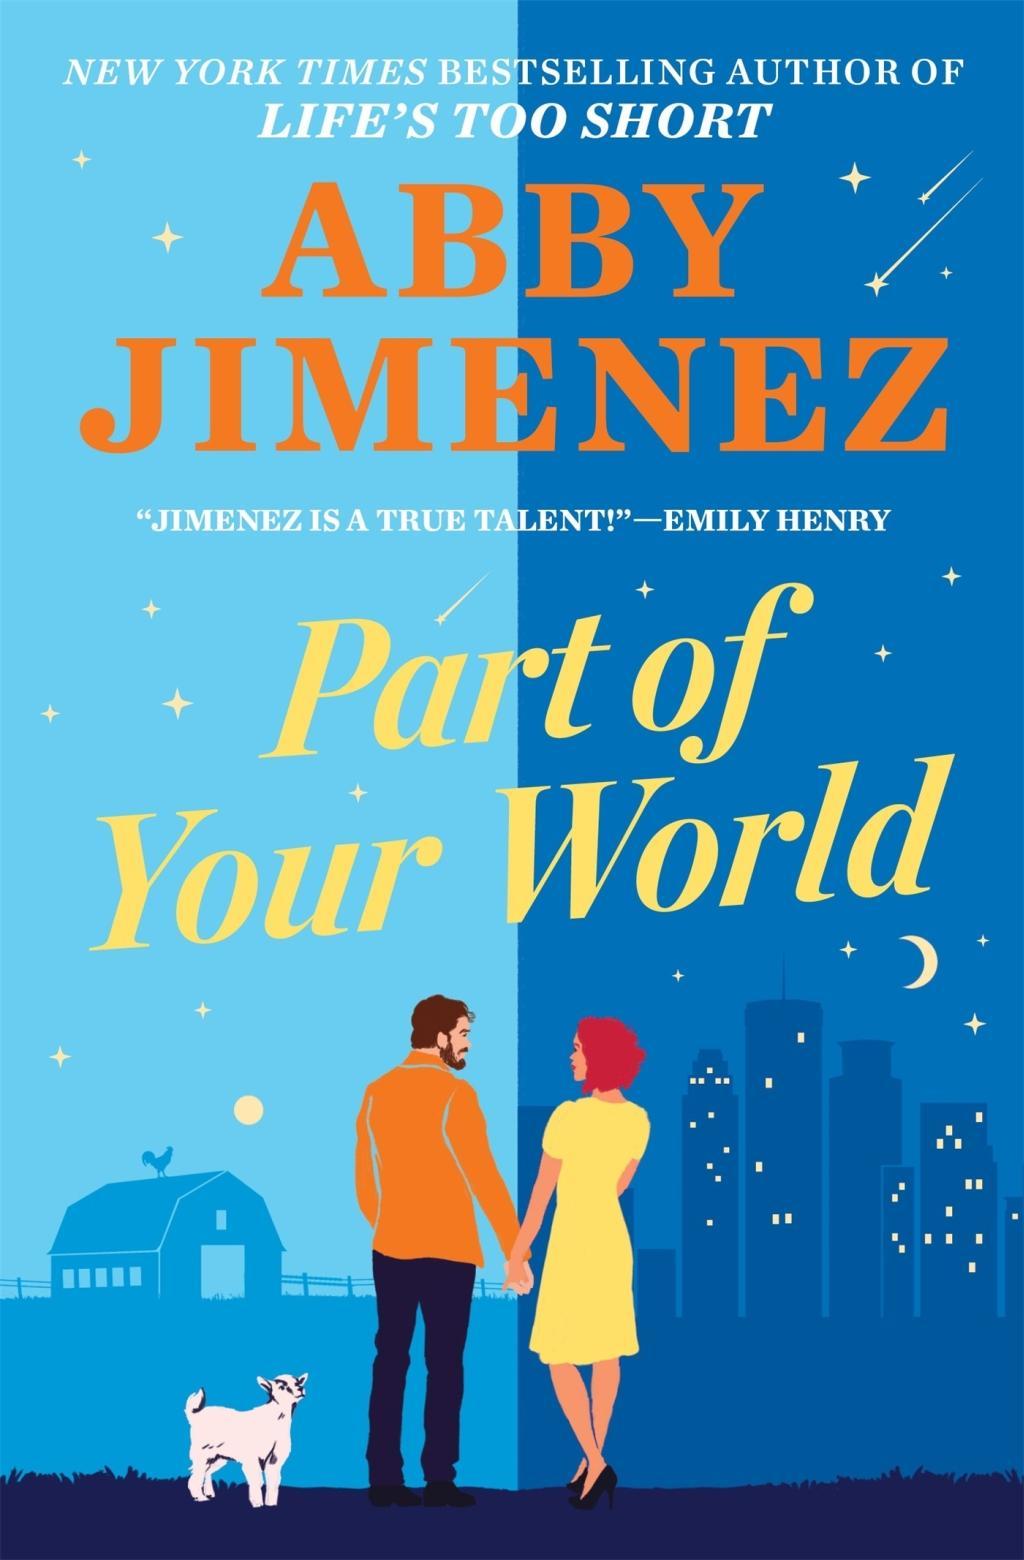 Book Part of Your World Abby Jimenez